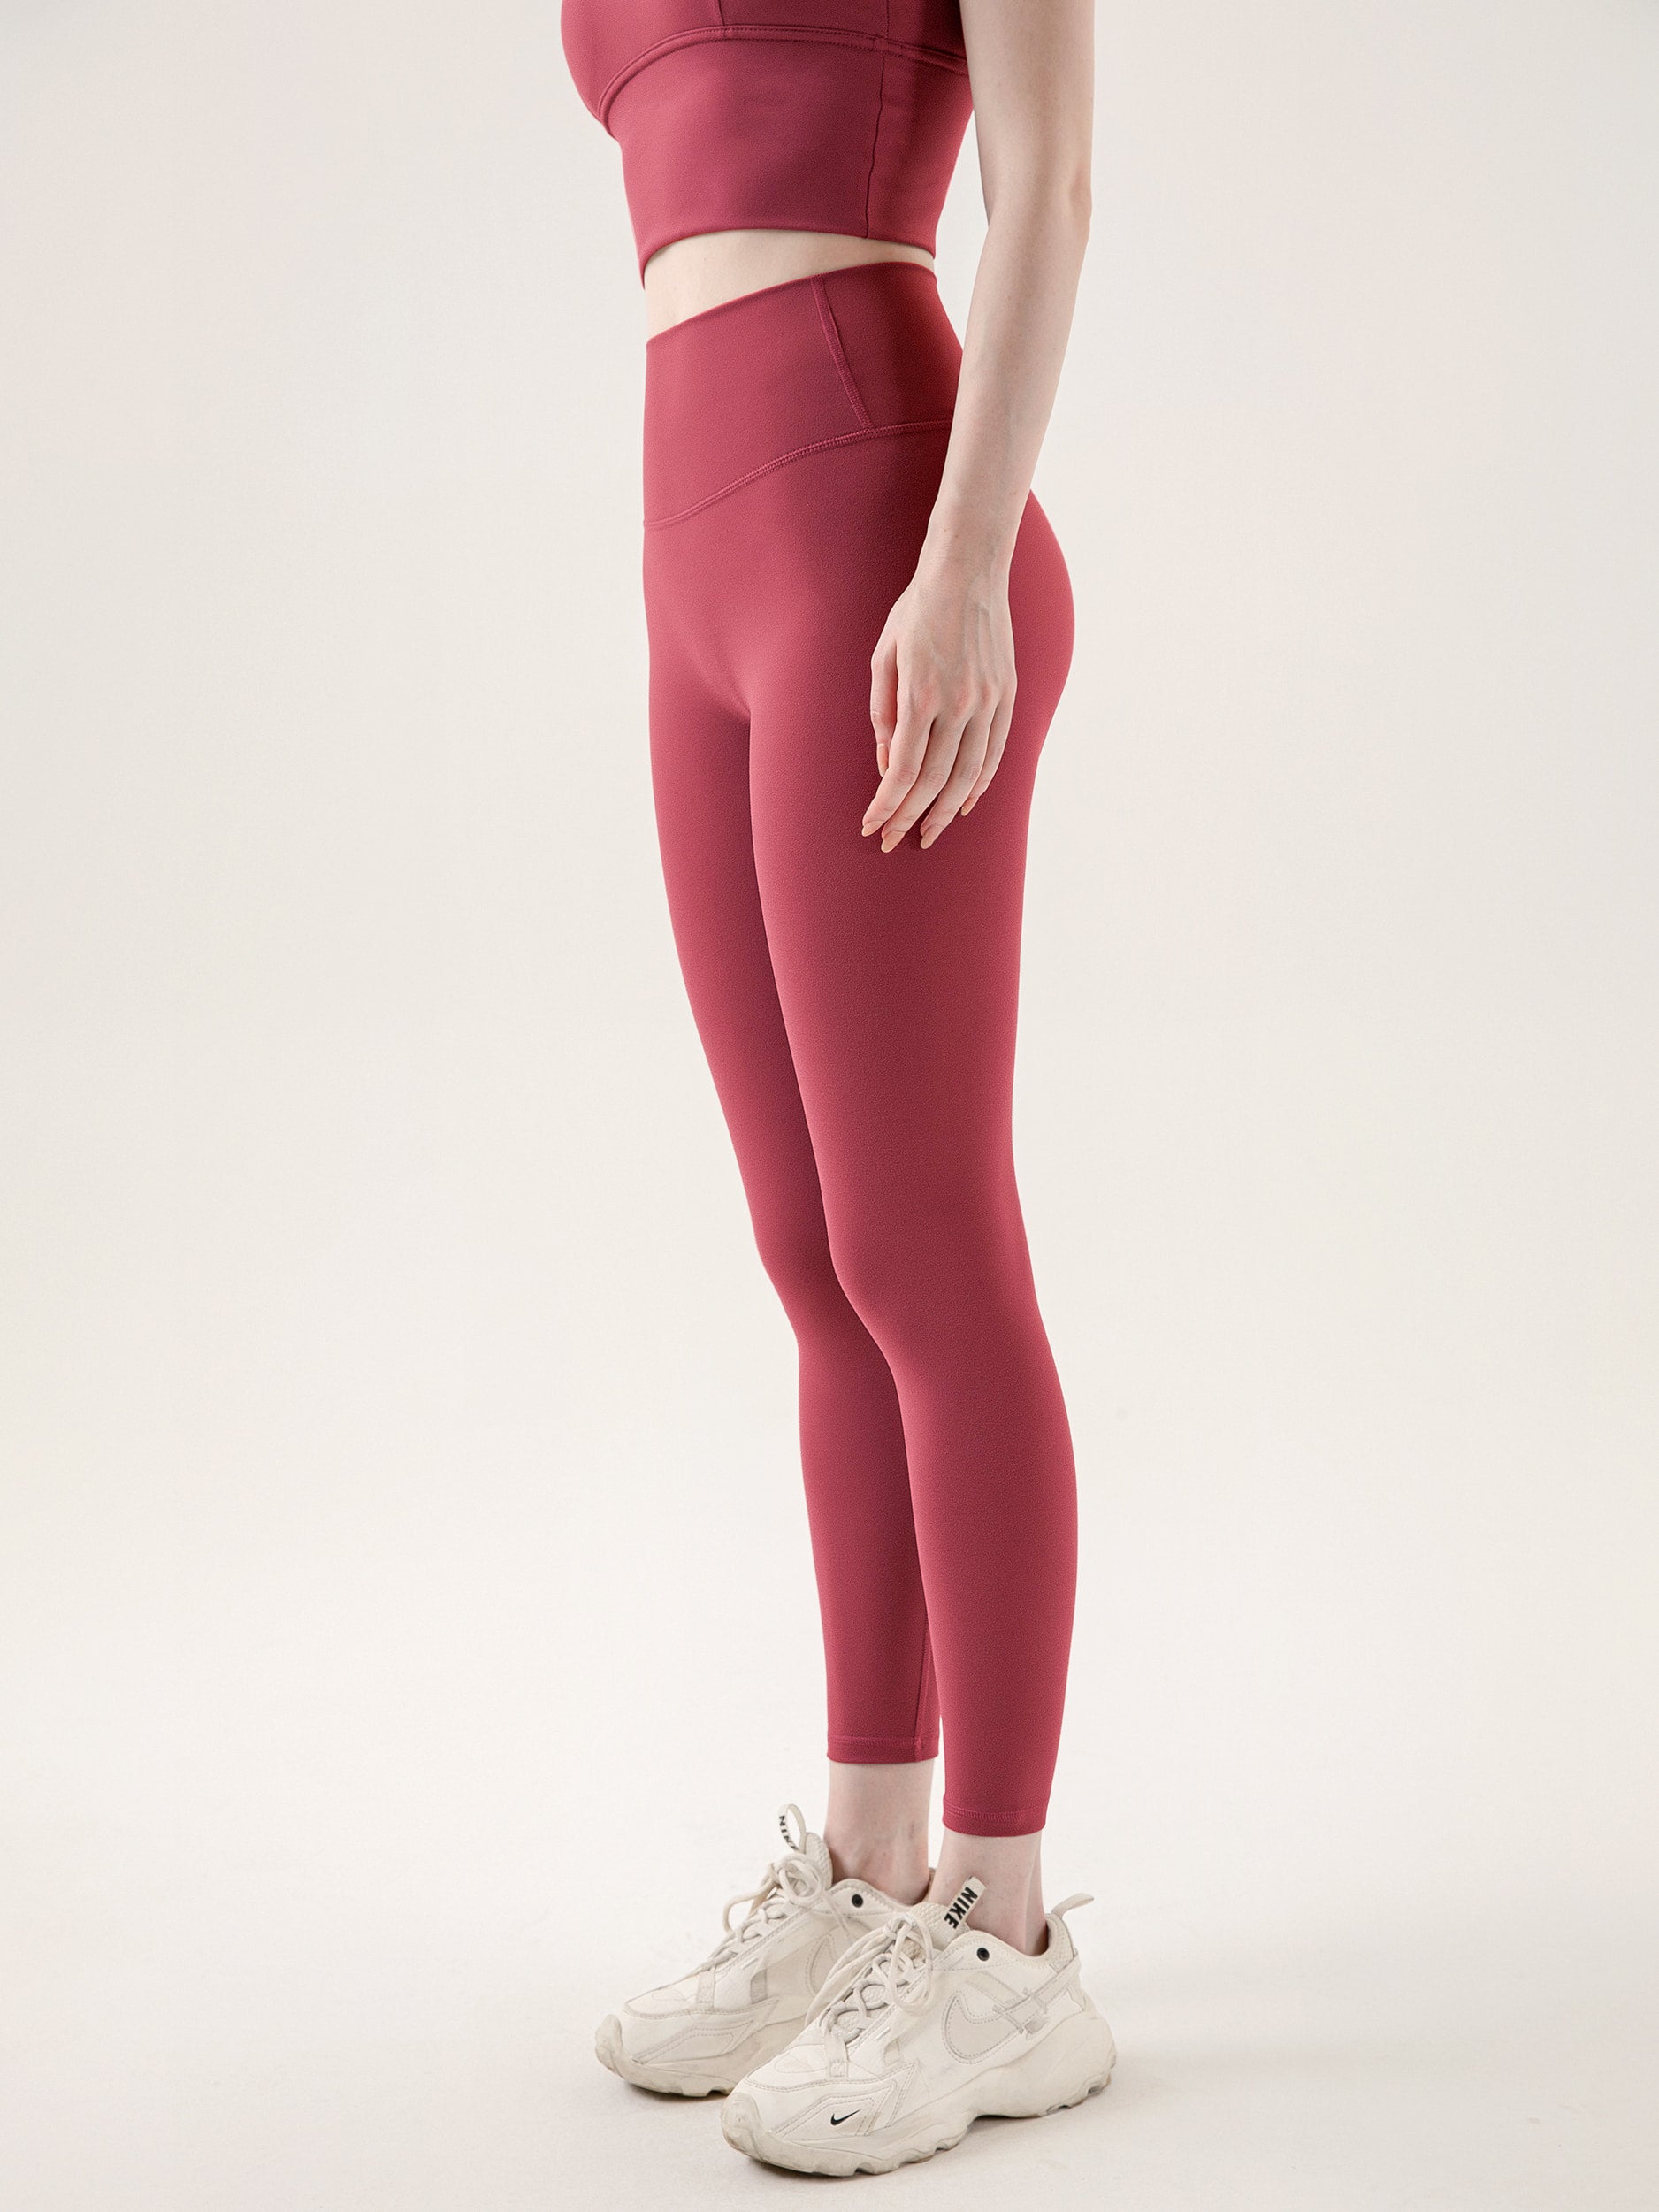 Vital 'n' Free Leggings - Red Wine: Breathe Easy, Move Freely – Click Holic  Activewear